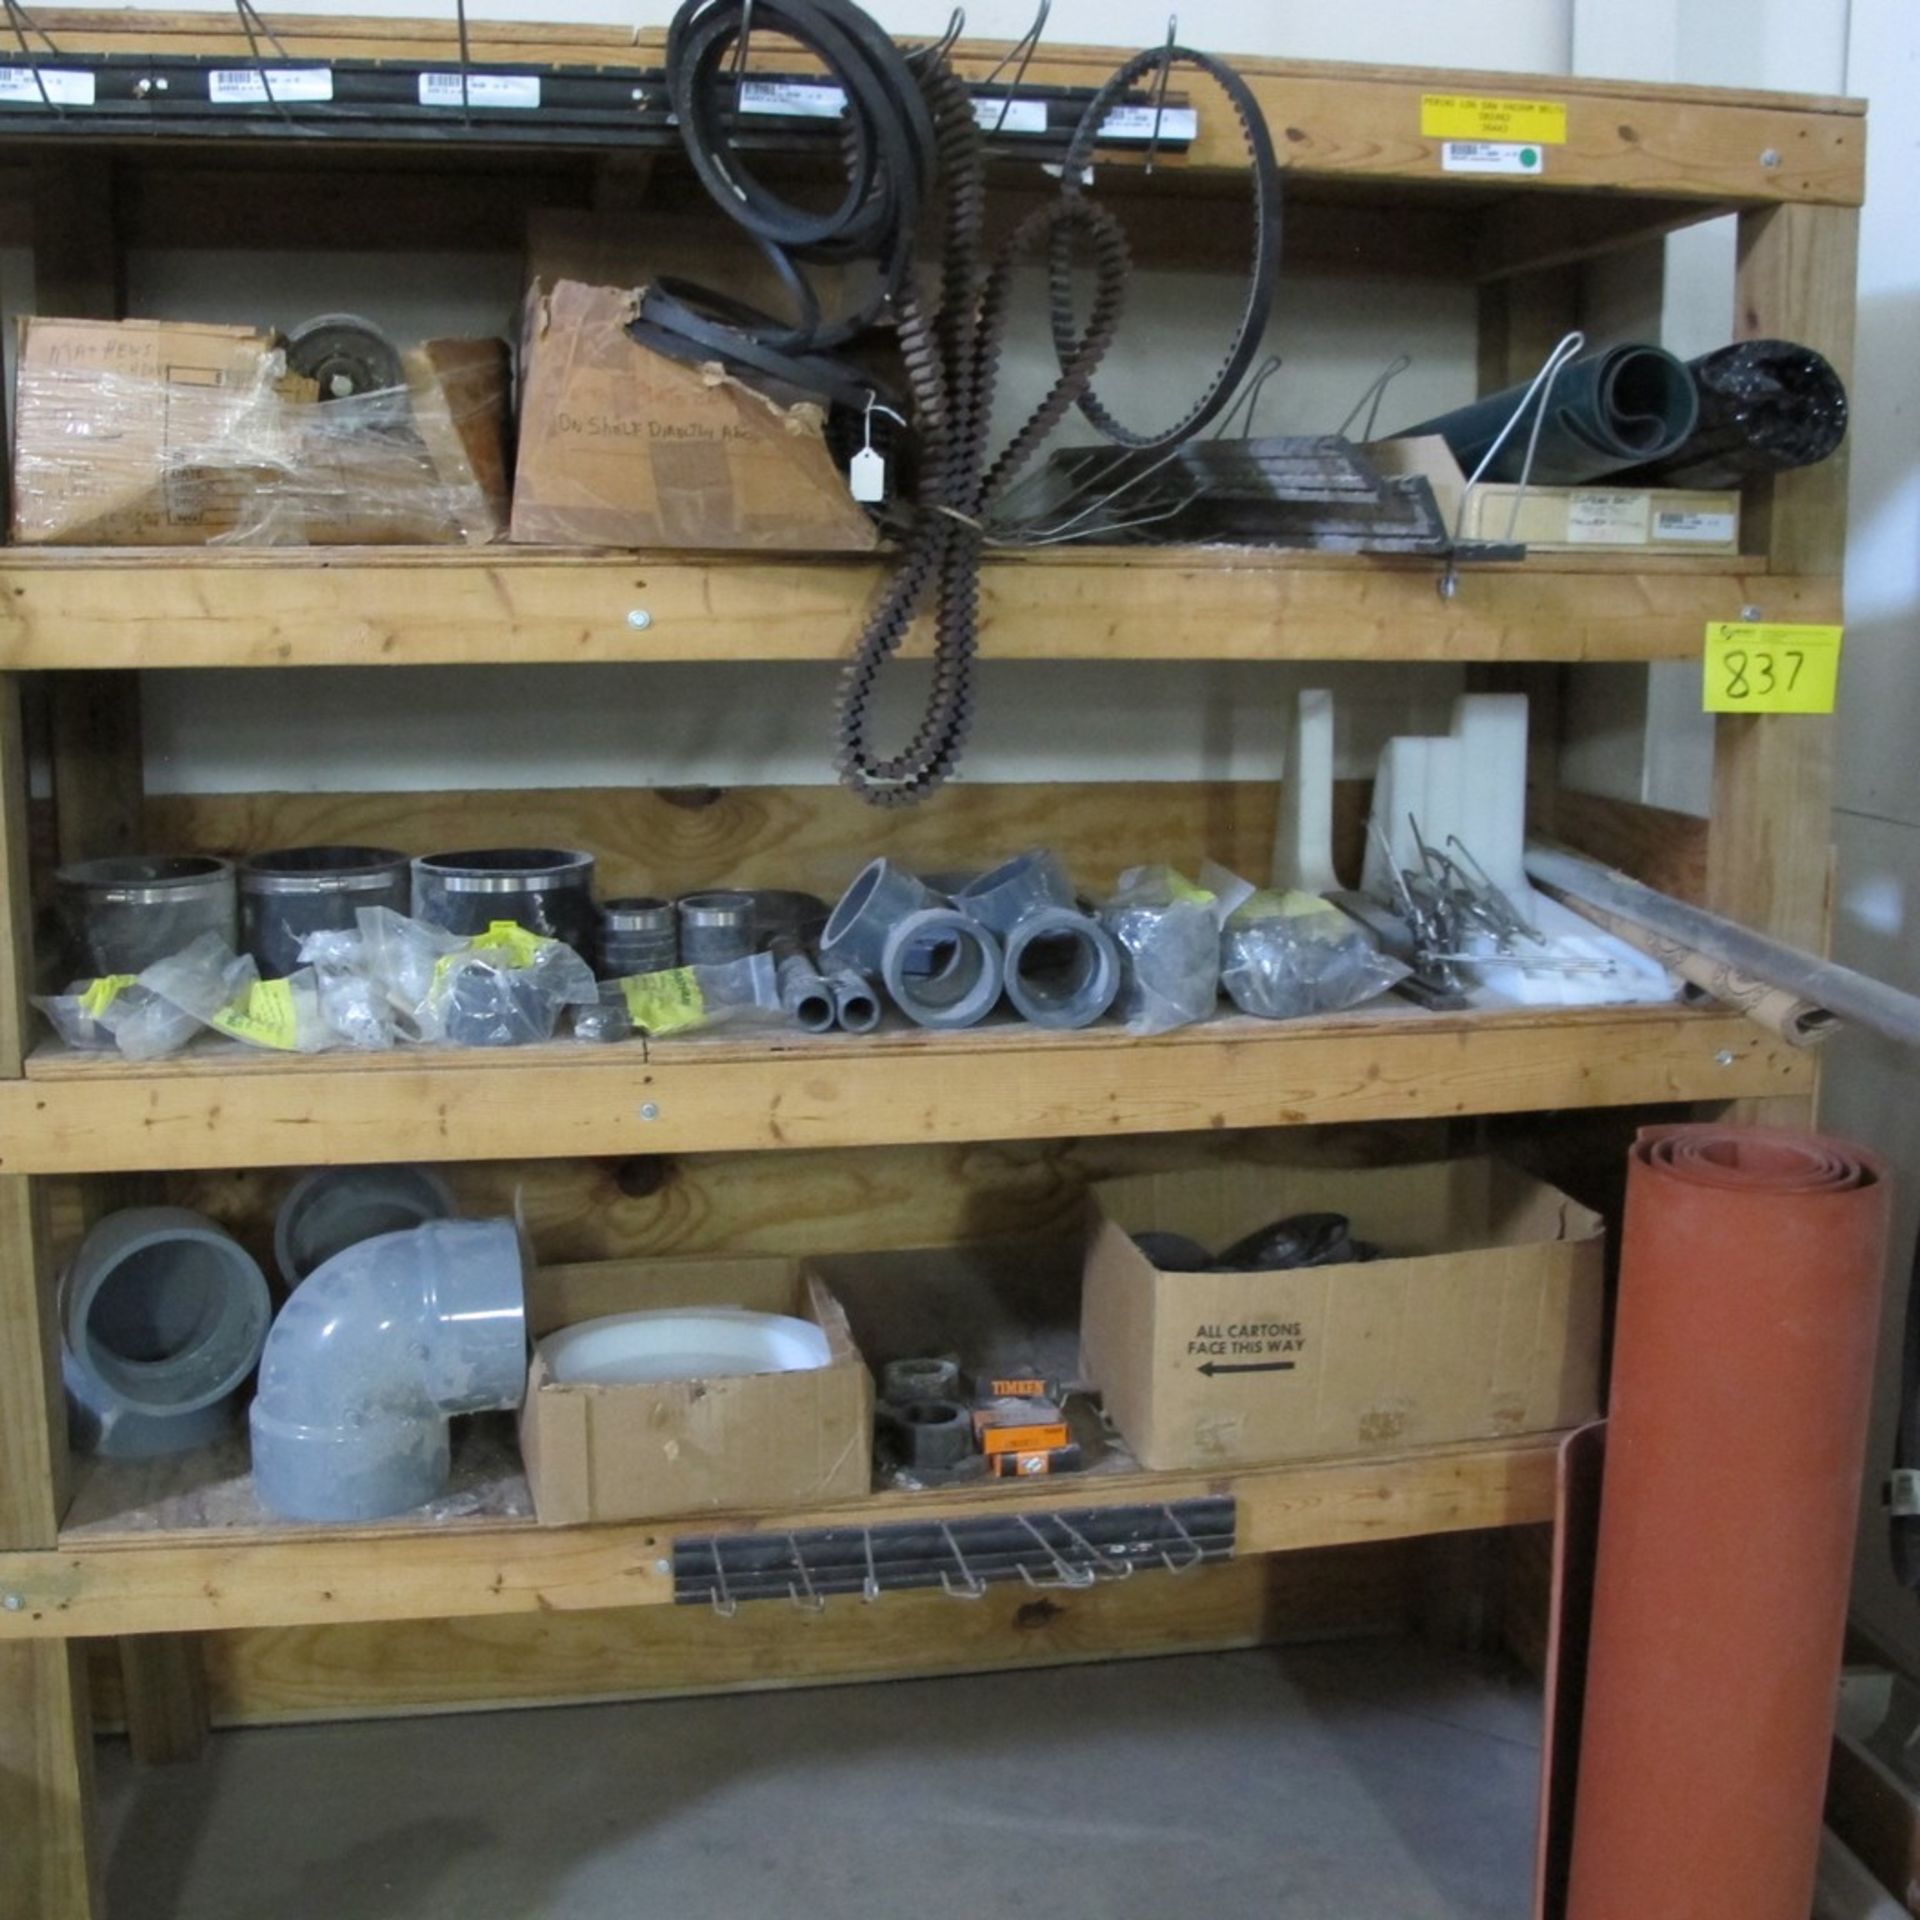 LOT OF (4) SECTION WOODEN RACK, 5-LEVELS TALL W/ ASST. METAL ROLLERS, HOSES, BELTS, CABLES, MOTOR, - Image 5 of 5